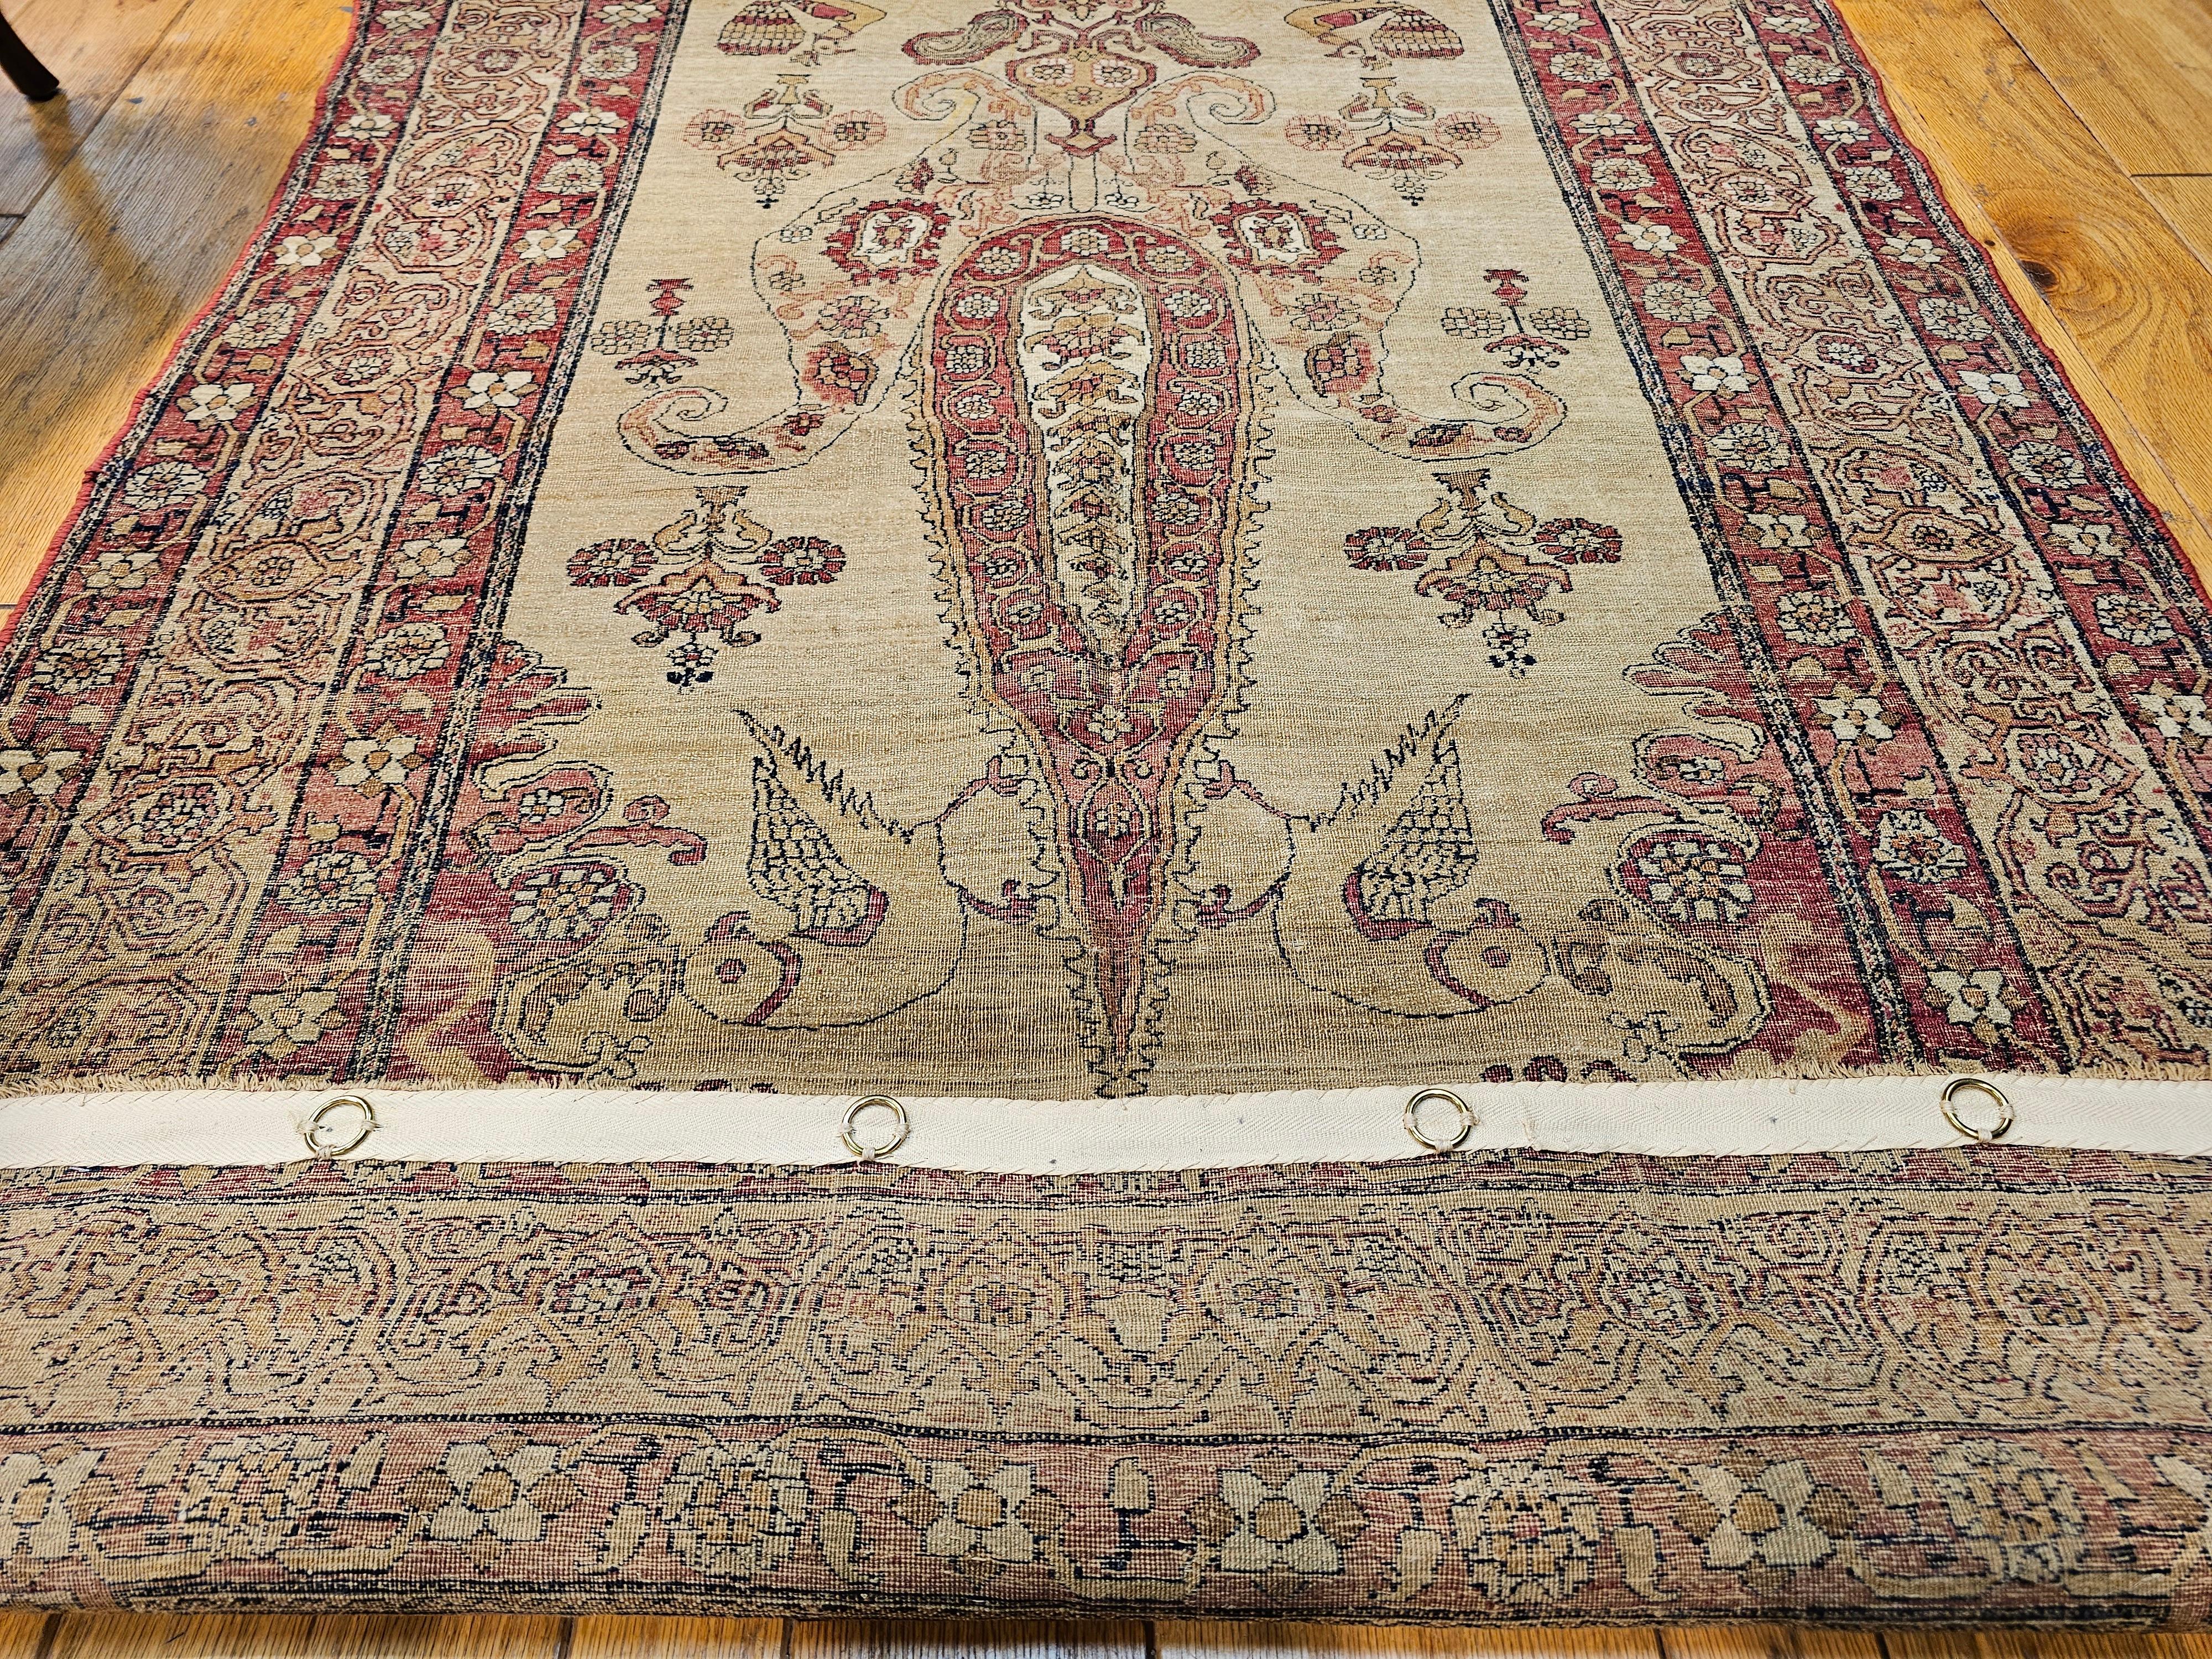 19th Century Persian Kerman Lavar Pictorial “Tree of Life” Rug in Camel, Red For Sale 14